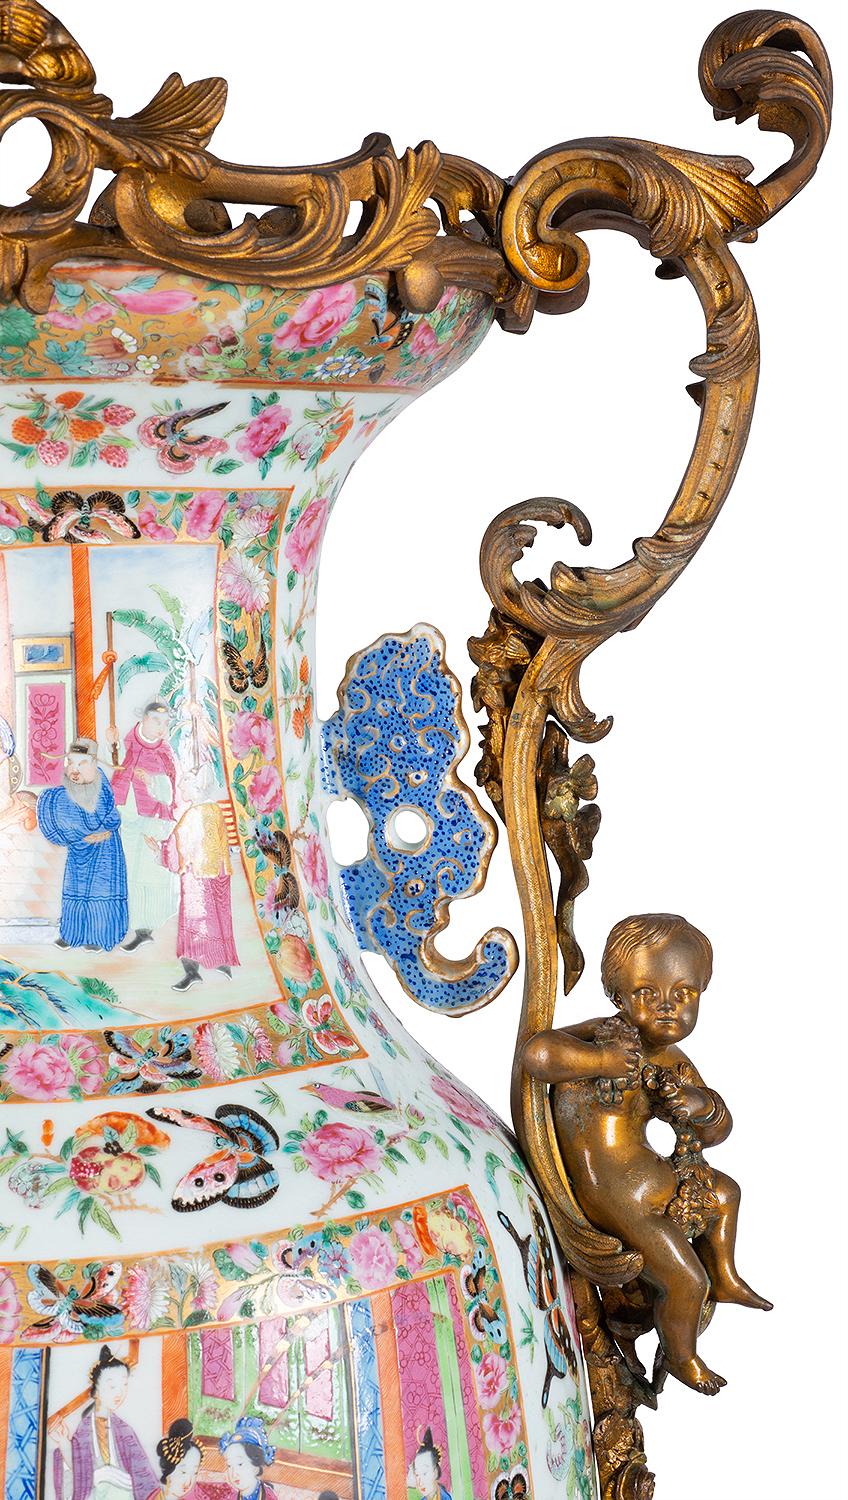 Large 19th Century Rose Medallion Vase or Lamp, Ormolu Mounted In Good Condition For Sale In Brighton, Sussex